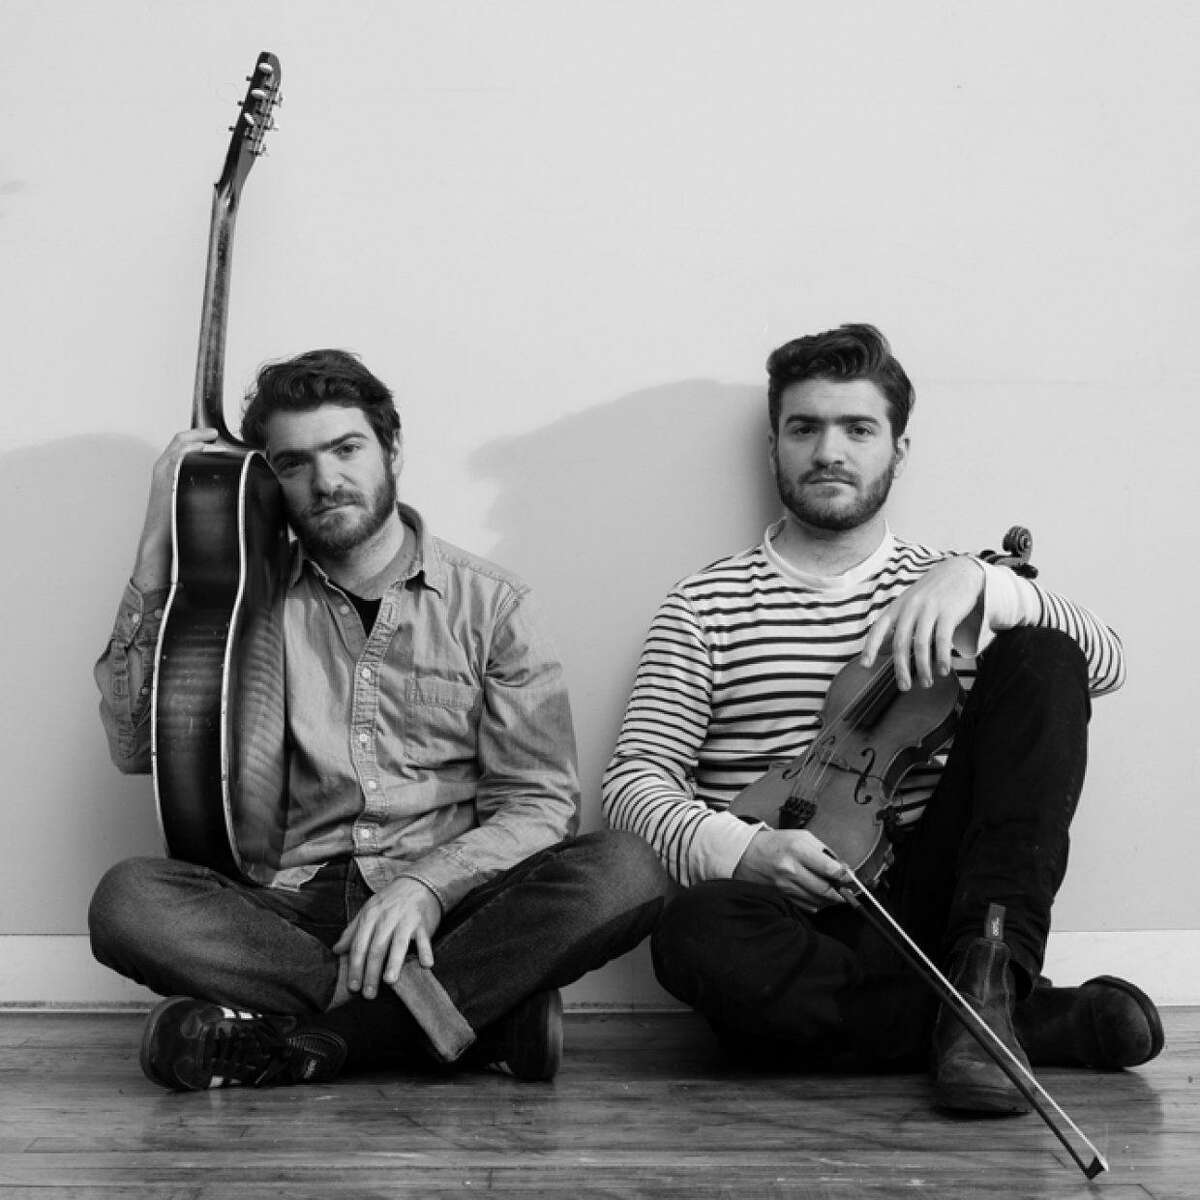 The Brother Brothers — identical twins Adam and David Moss — will bring acoustic music and sibling harmonies to the First Presbyterian Church Hall Friday in the first CT Folk “Folk Fridays” show of 2018.